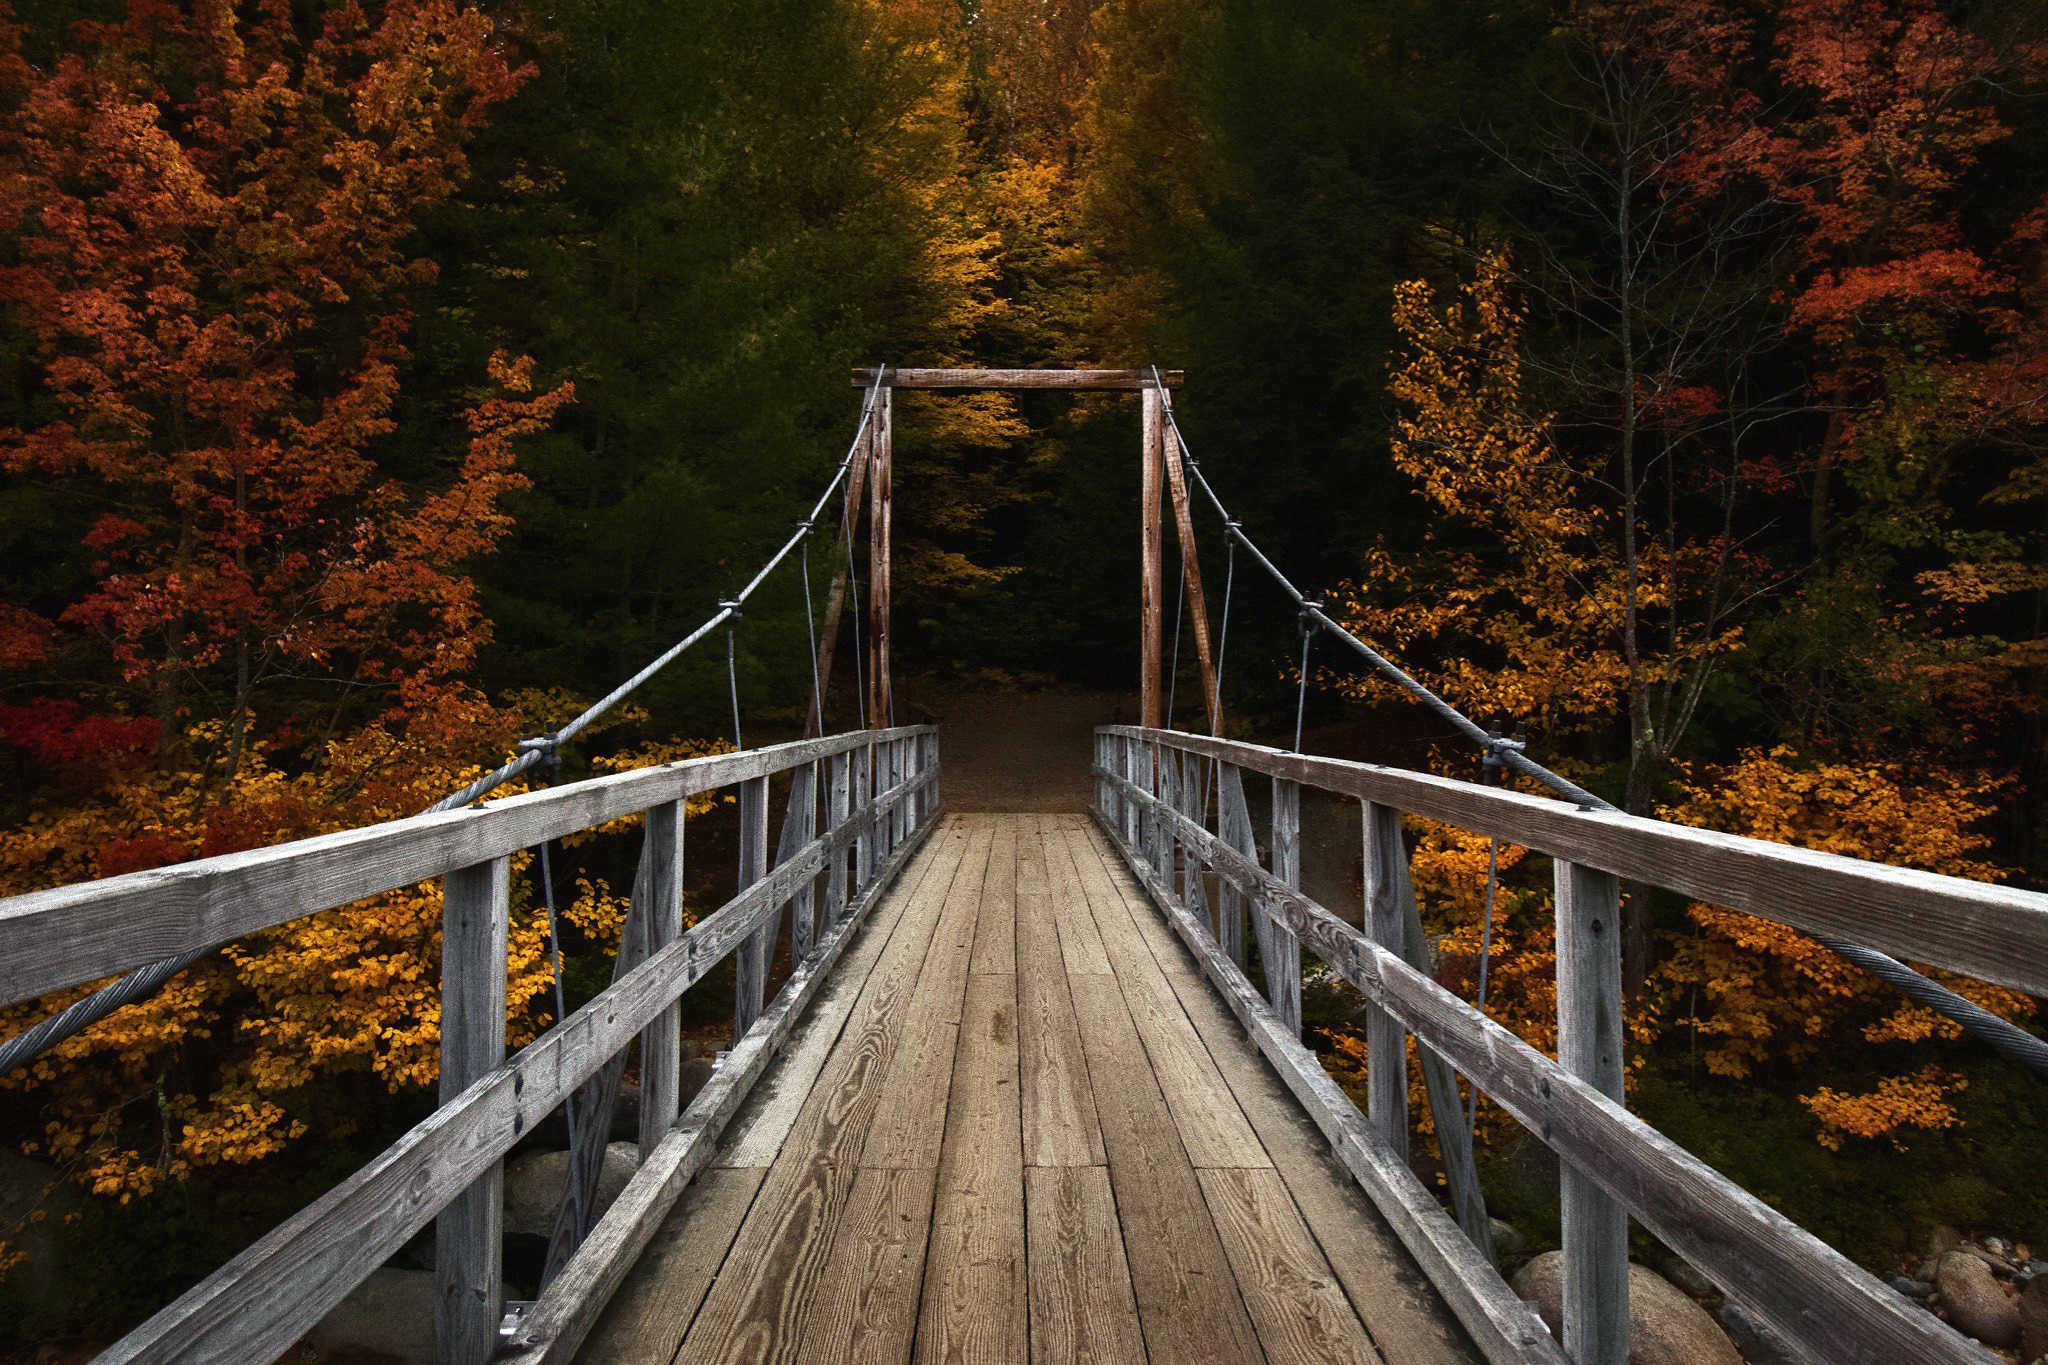 General 2048x1365 bridge wood outdoors wooden bridge forest red leaves nature